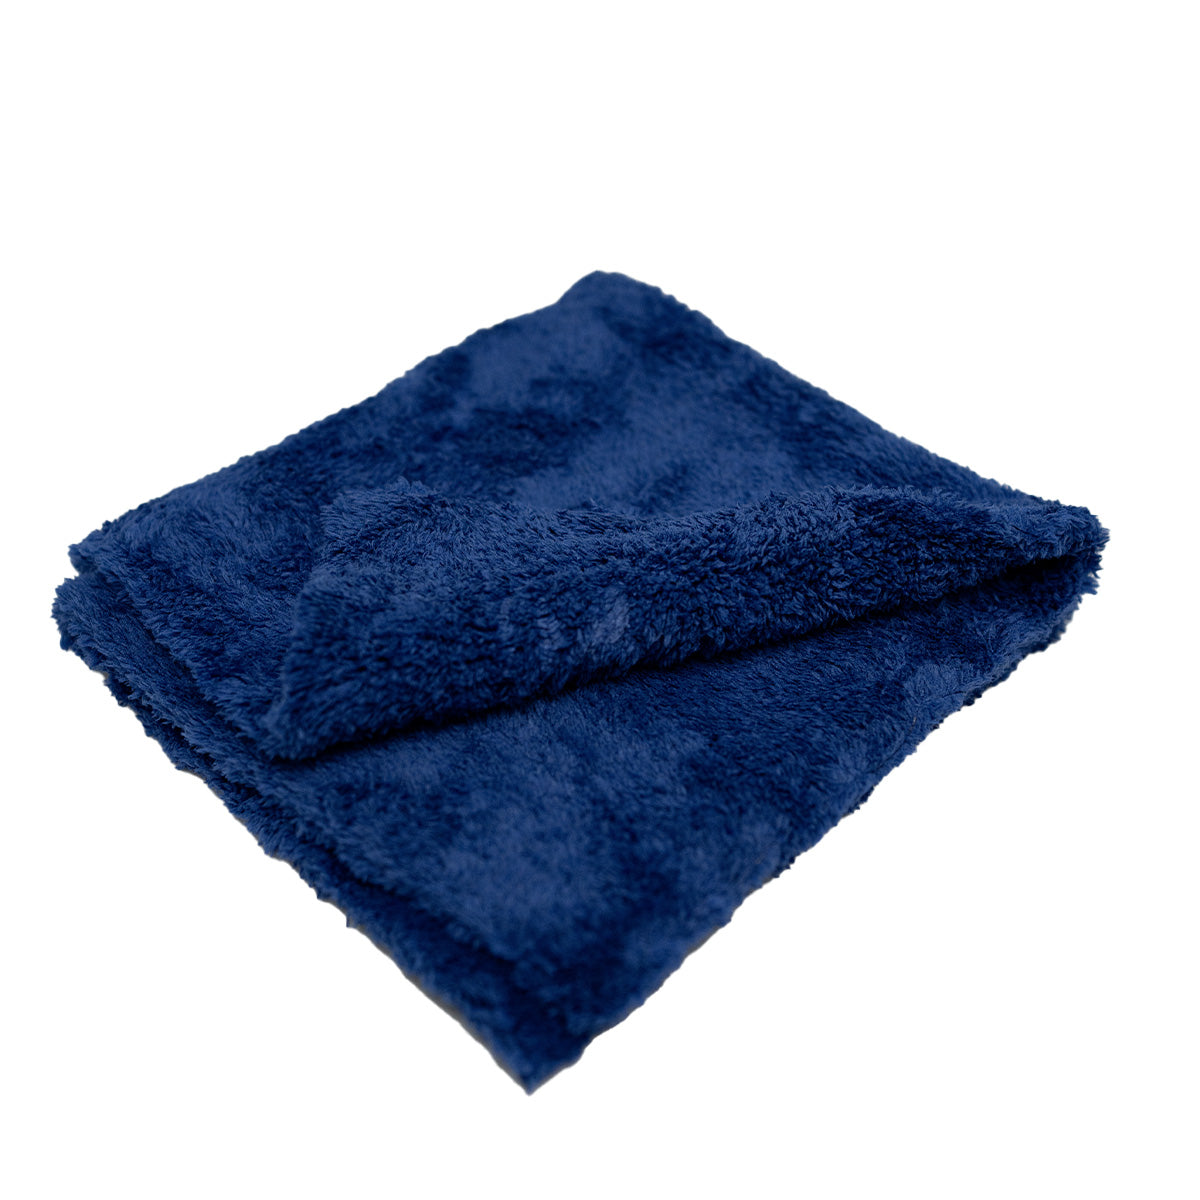 Labocosmetica buffing and polishing cloth. Buffing towel. Ultra soft microfibre with long and fluffy fibres. Soft cloth. quick detailer cloth and polish residue cloth. Labocsmetica Ireland